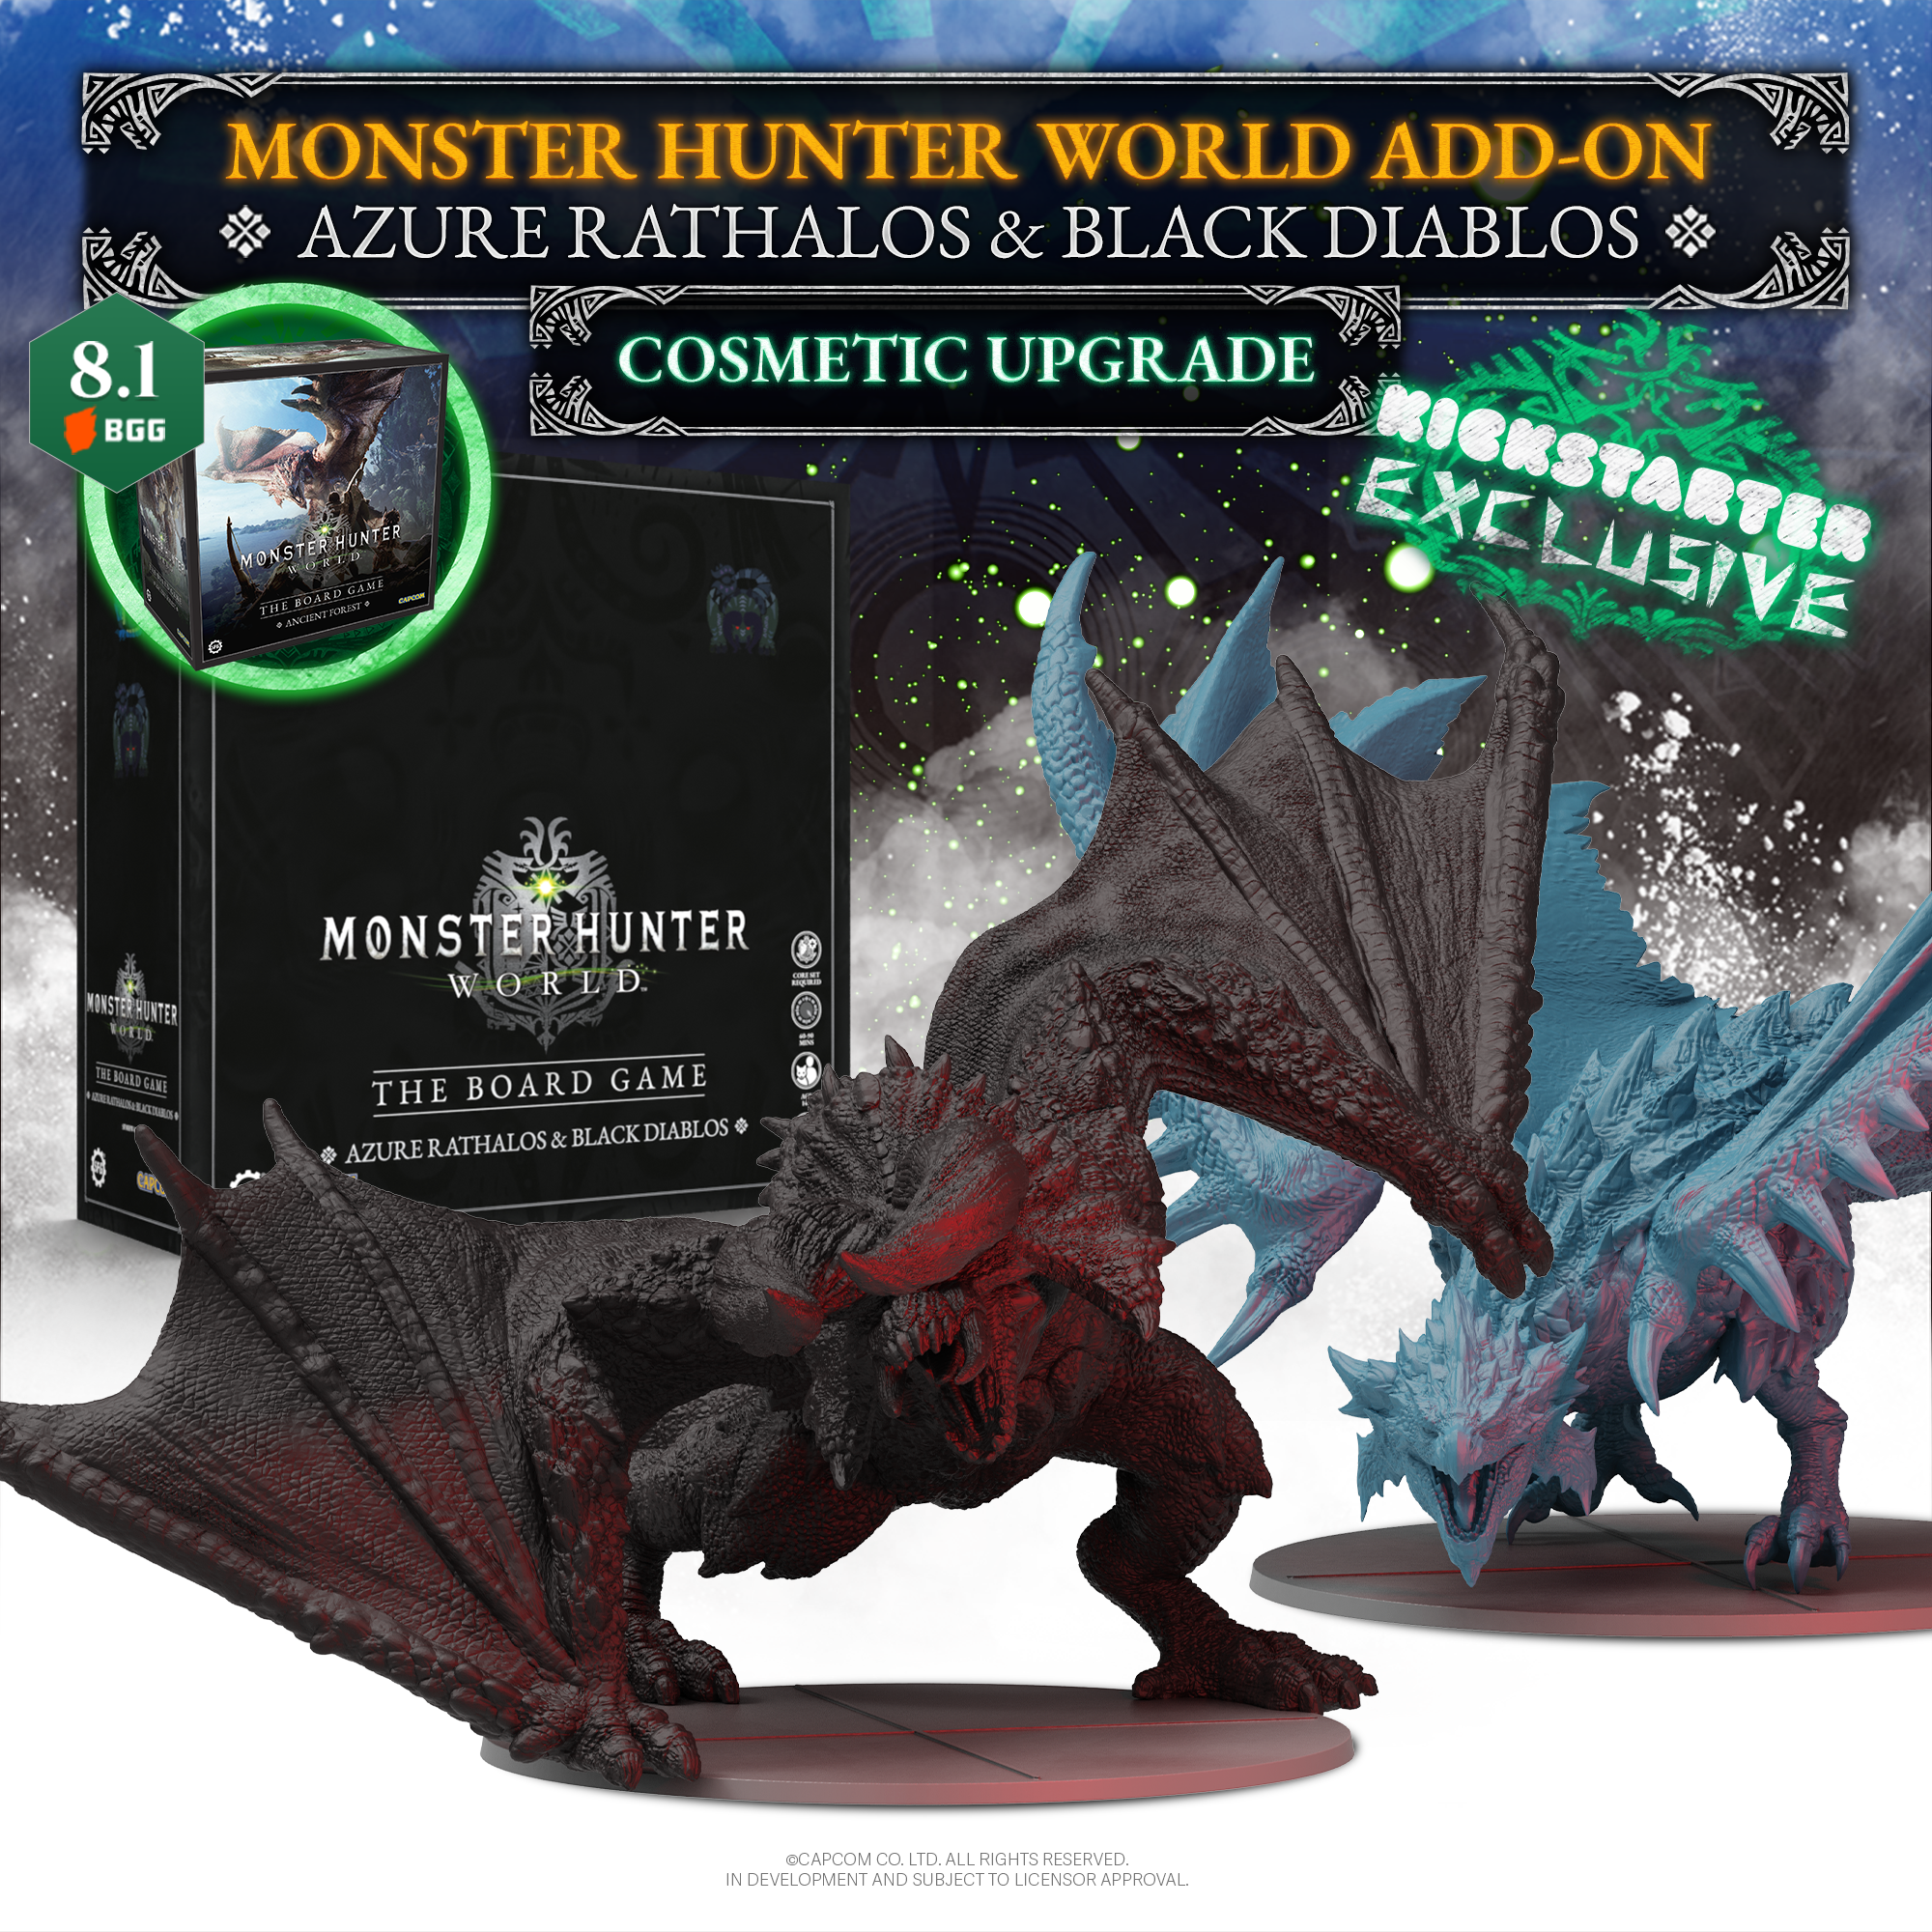 Monster Hunter World: The Board Game by Steamforged Games Ltd